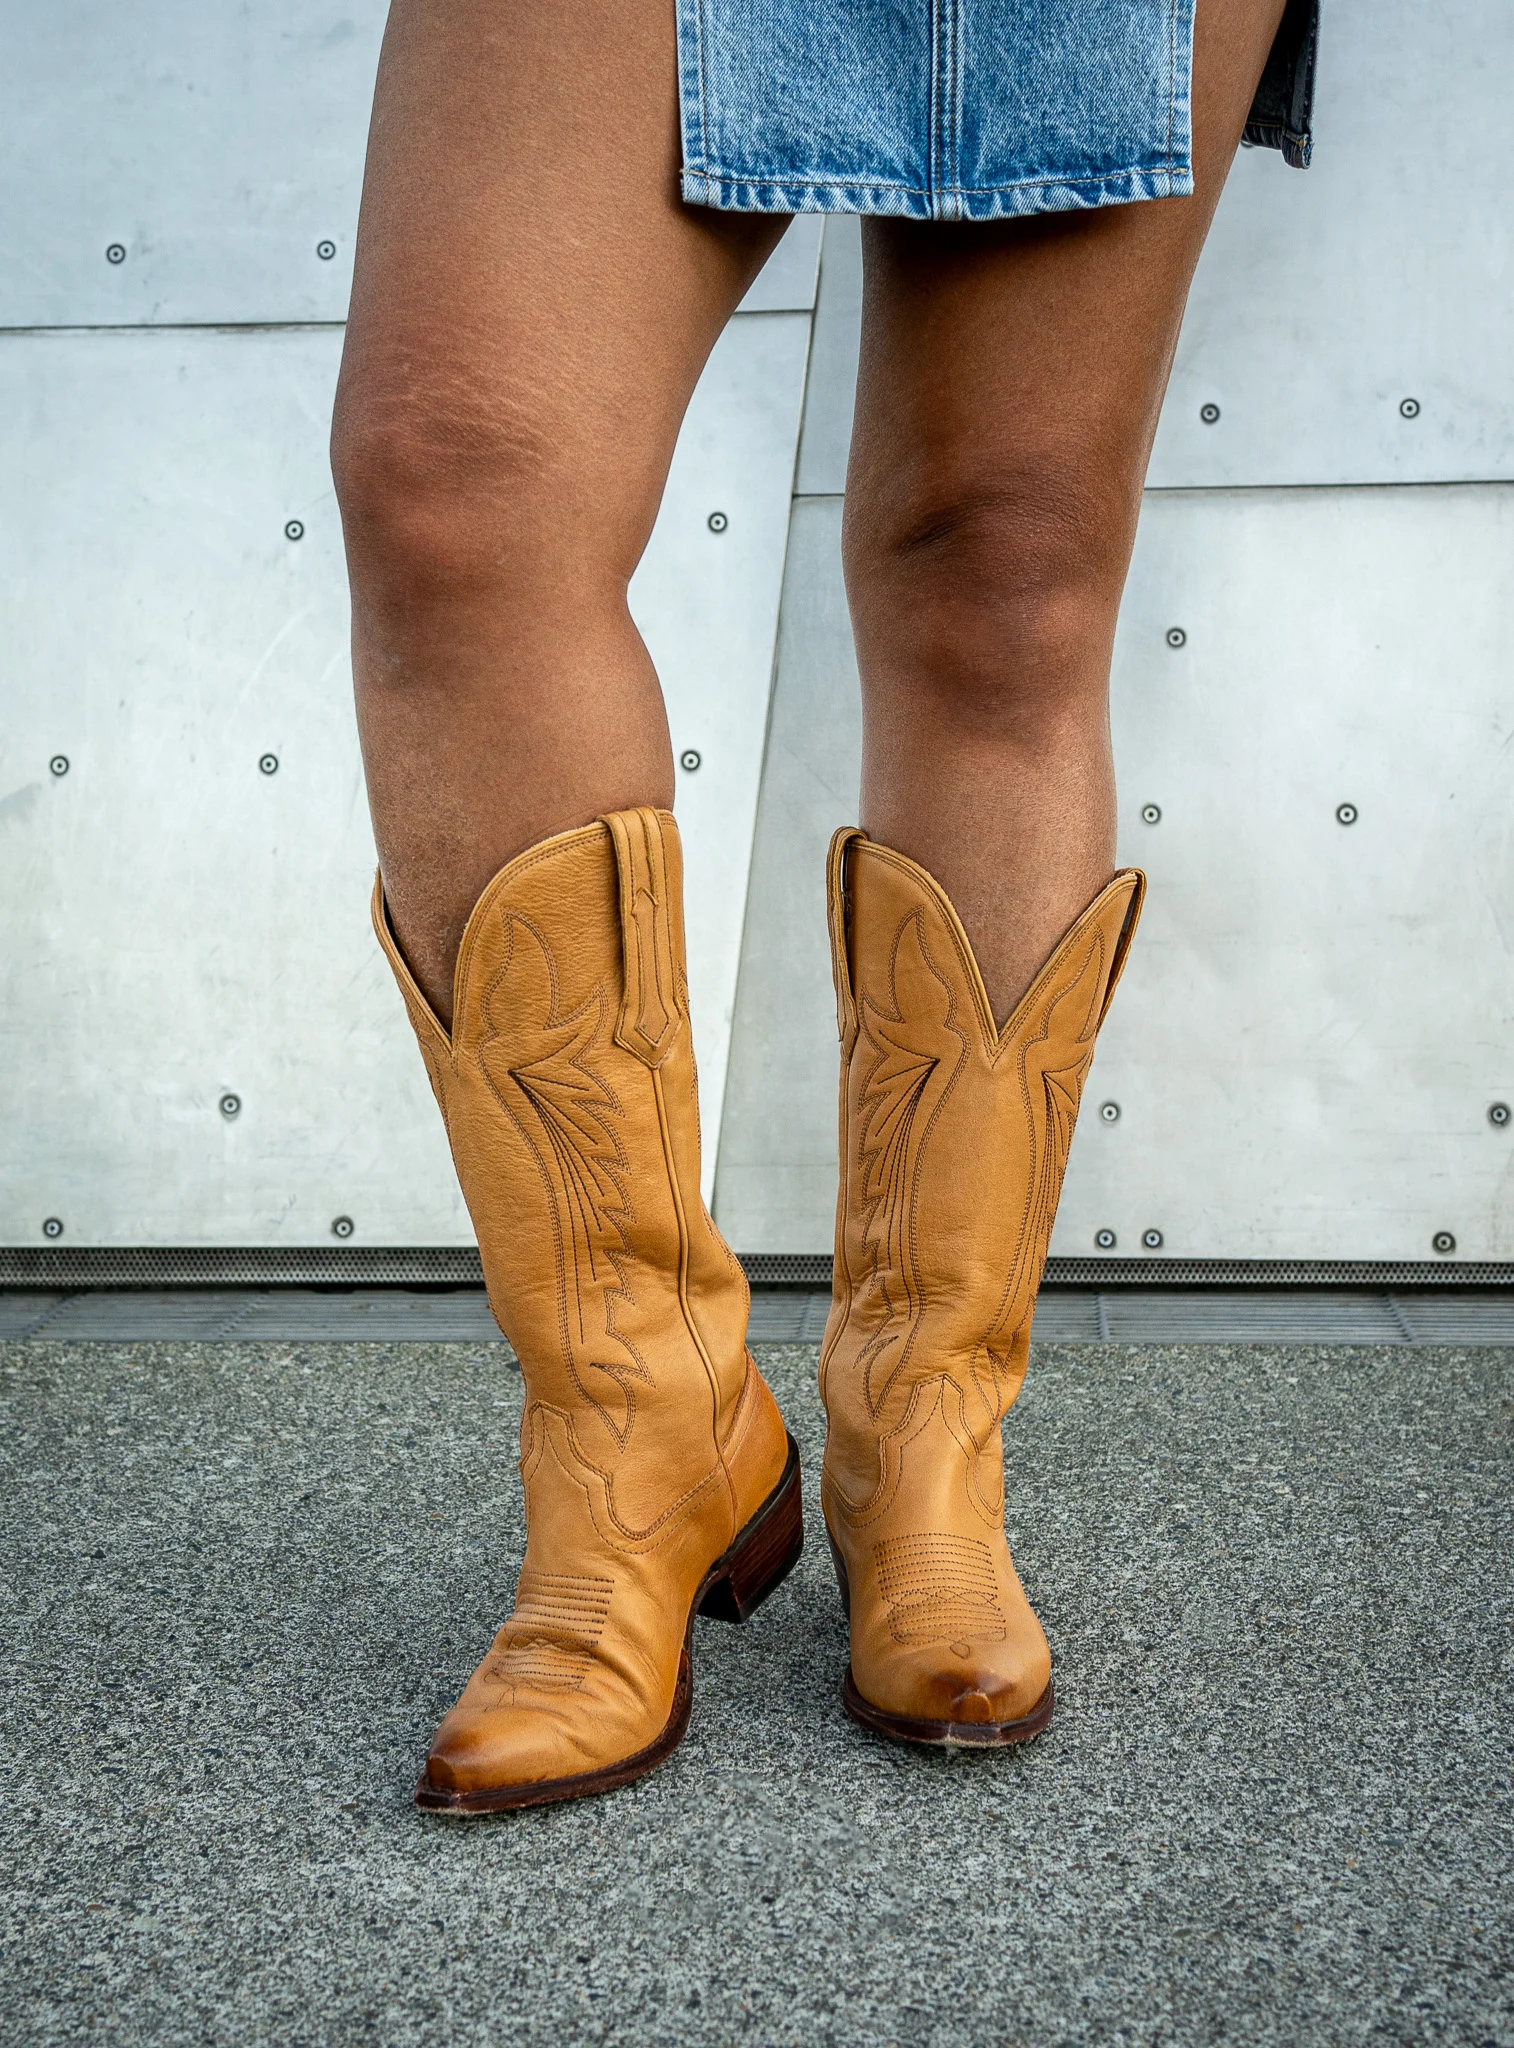 Tecovas Kasey western boot review